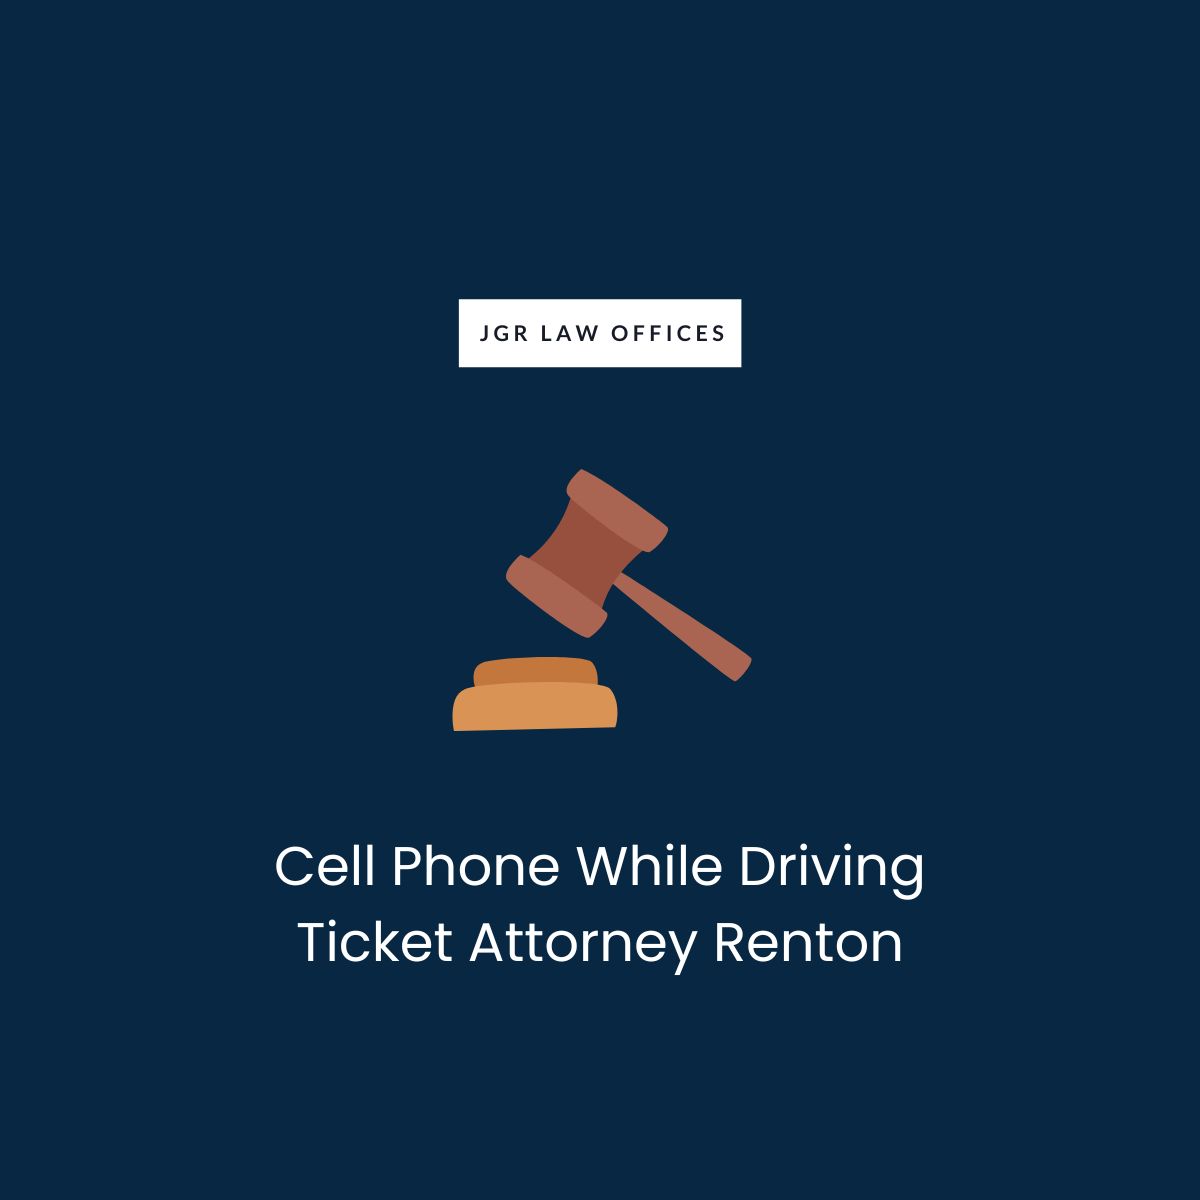 Cell Phone While Driving Ticket Attorney Renton